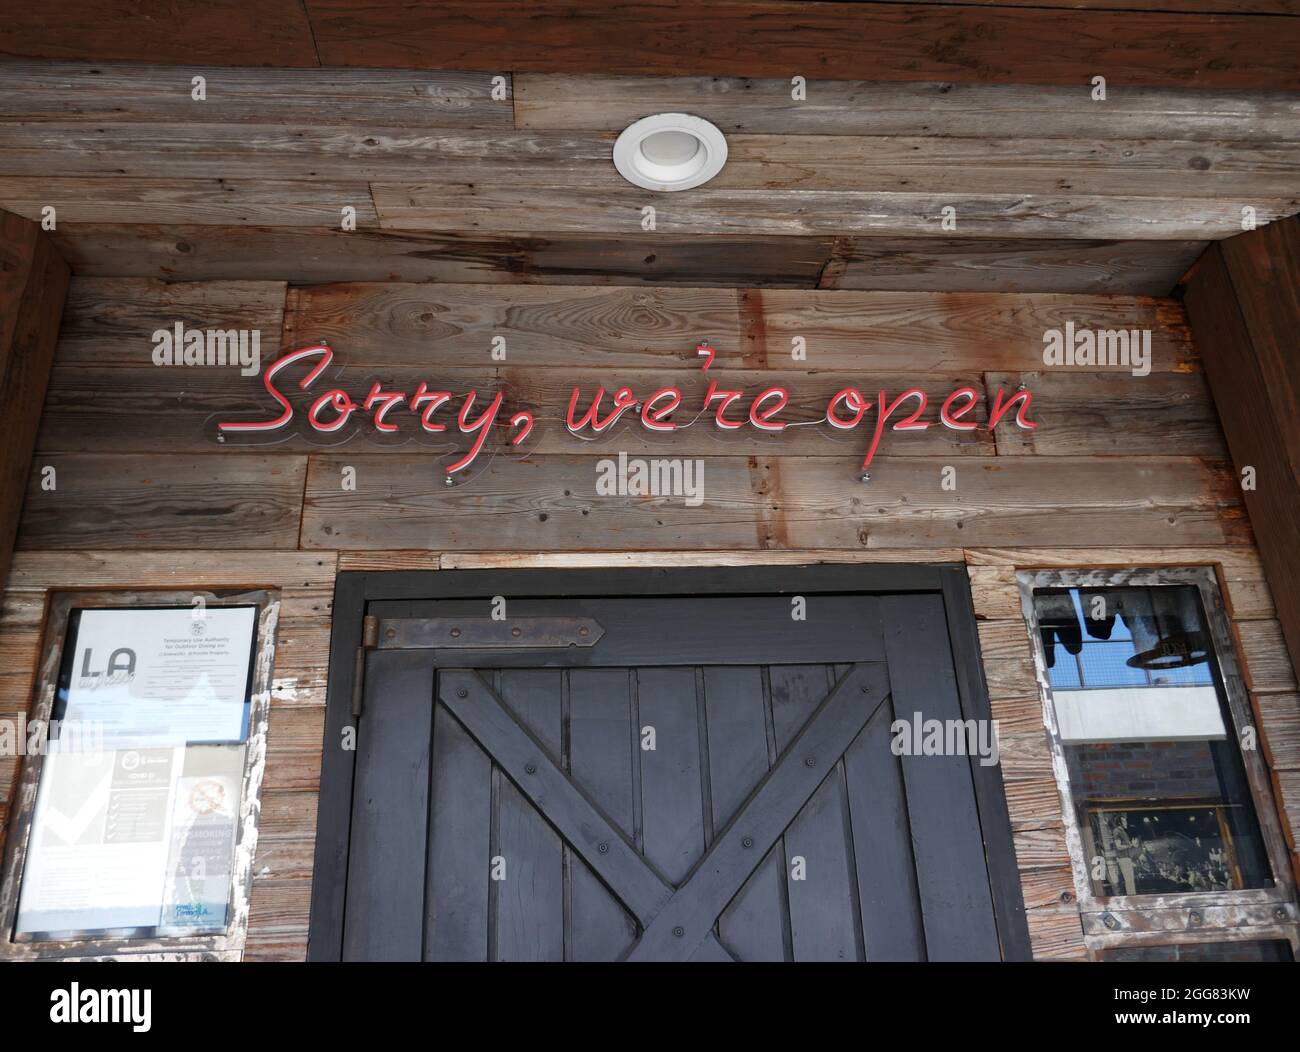 Los Angeles, California, USA 27th August 2021 A general view of atmosphere of Sorry We're Open Sign at Improv on Melrose Avenue on August 27, 2021 in Los Angeles, California, USA. Photo by Barry King/Alamy Stock Photo Stock Photo